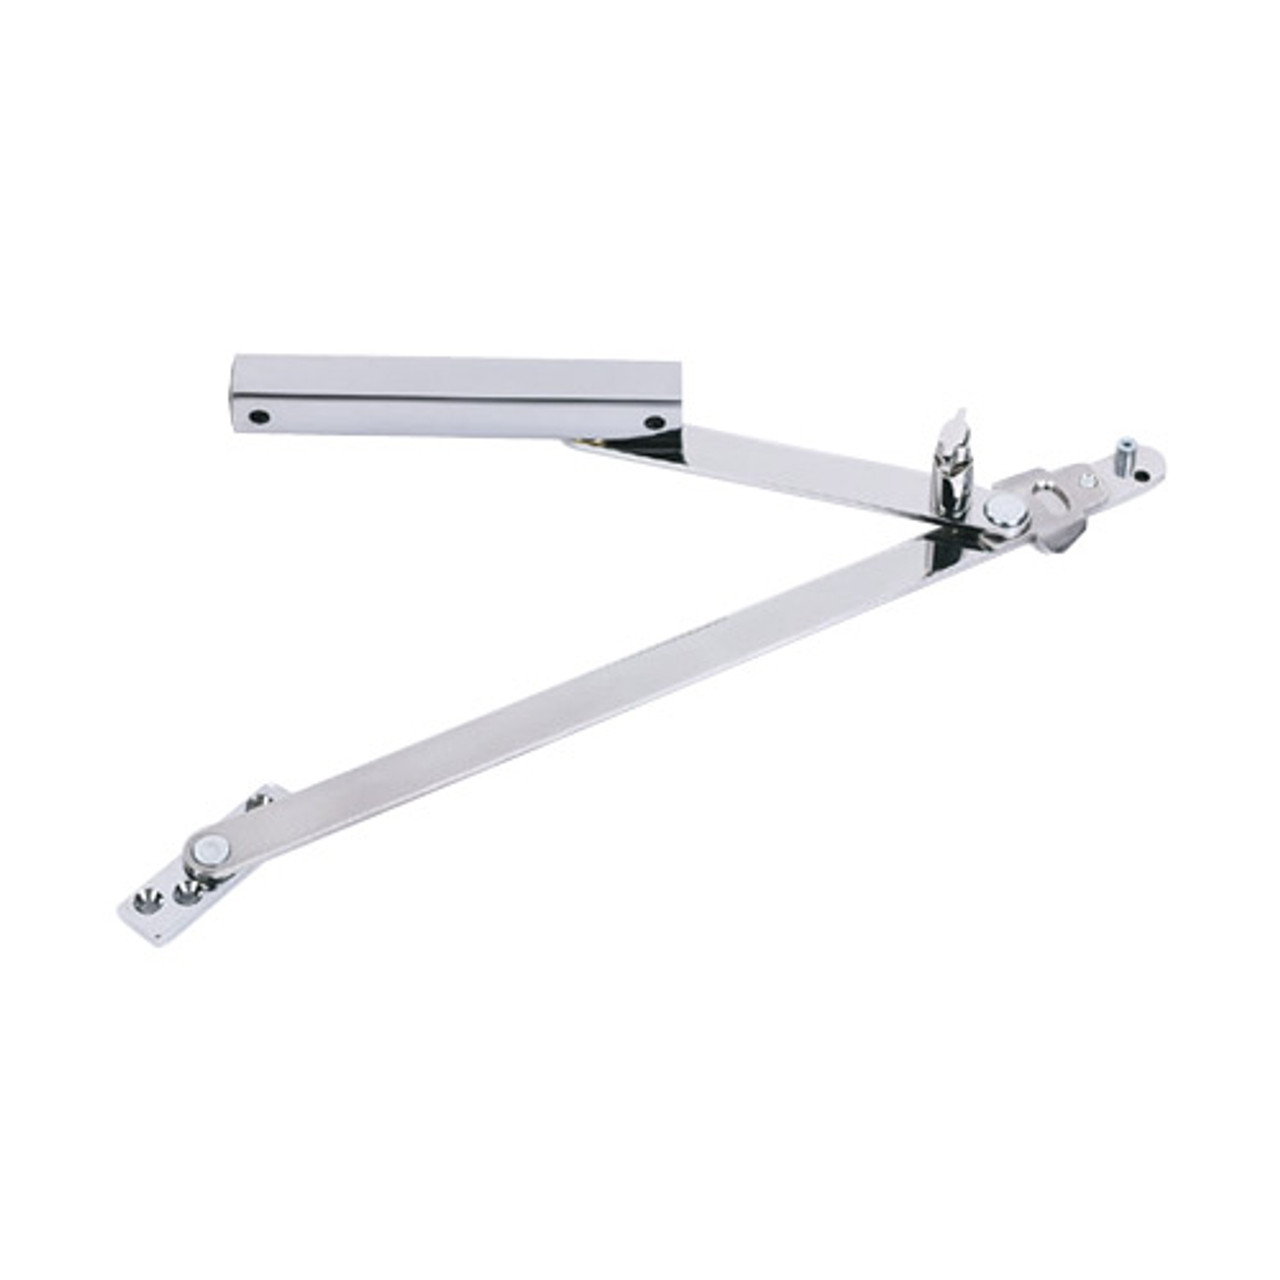 813S-US32-SHIM-2 Glynn Johnson 81 Series Heavy Duty Surface Overhead Stop Only with 1/2" Shim for Blade Stop Mounting in Bright Stainless Steel